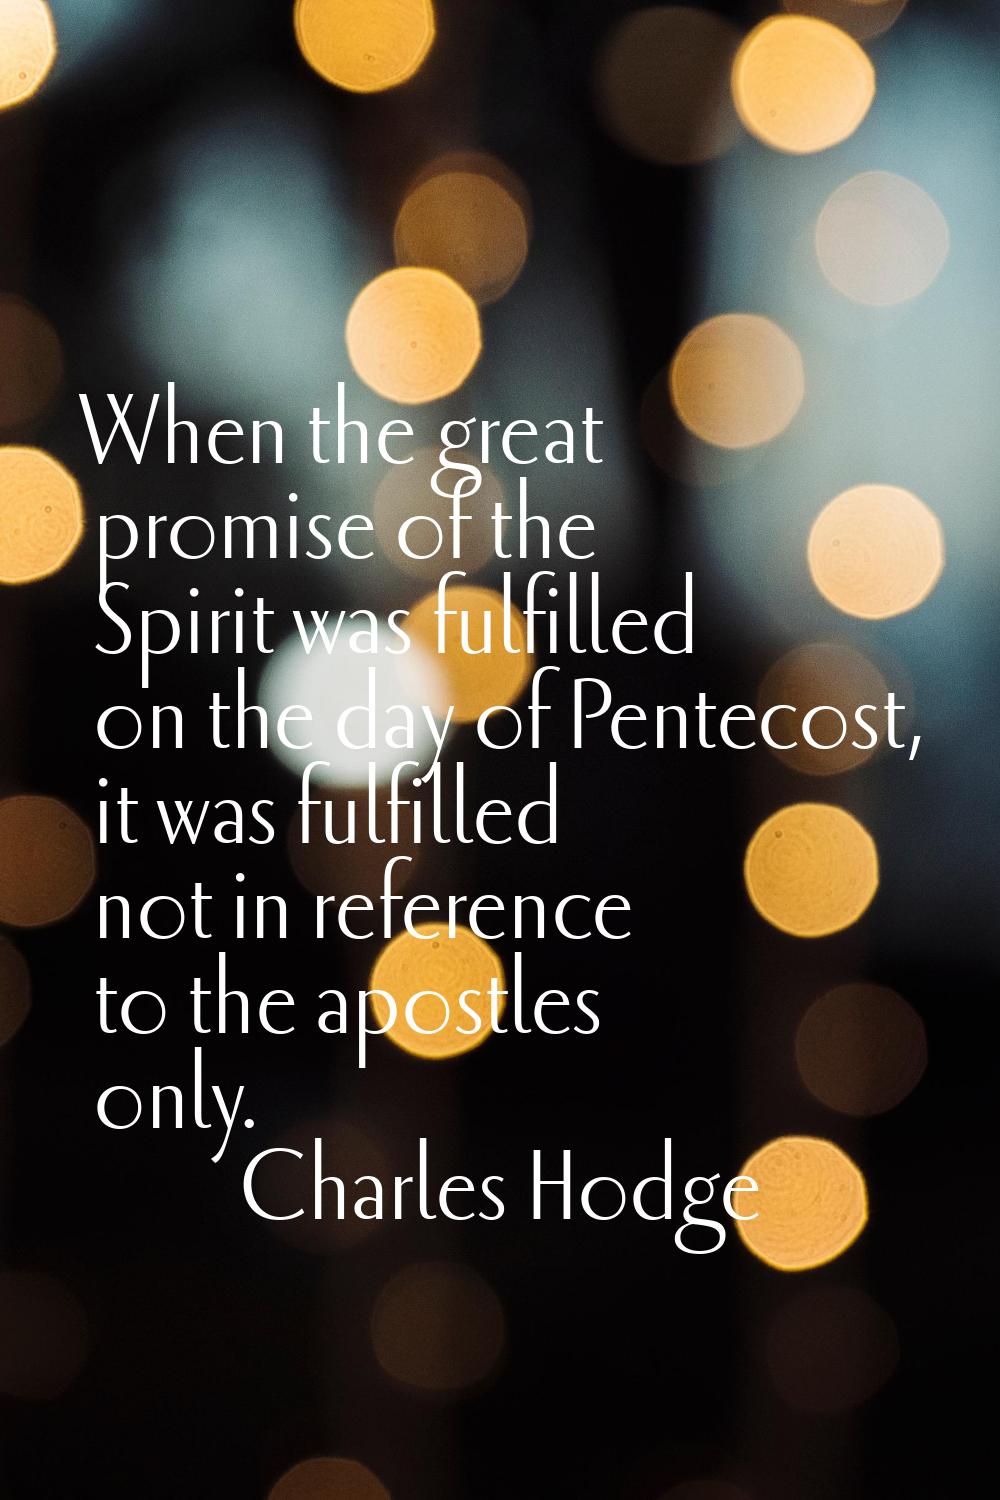 When the great promise of the Spirit was fulfilled on the day of Pentecost, it was fulfilled not in